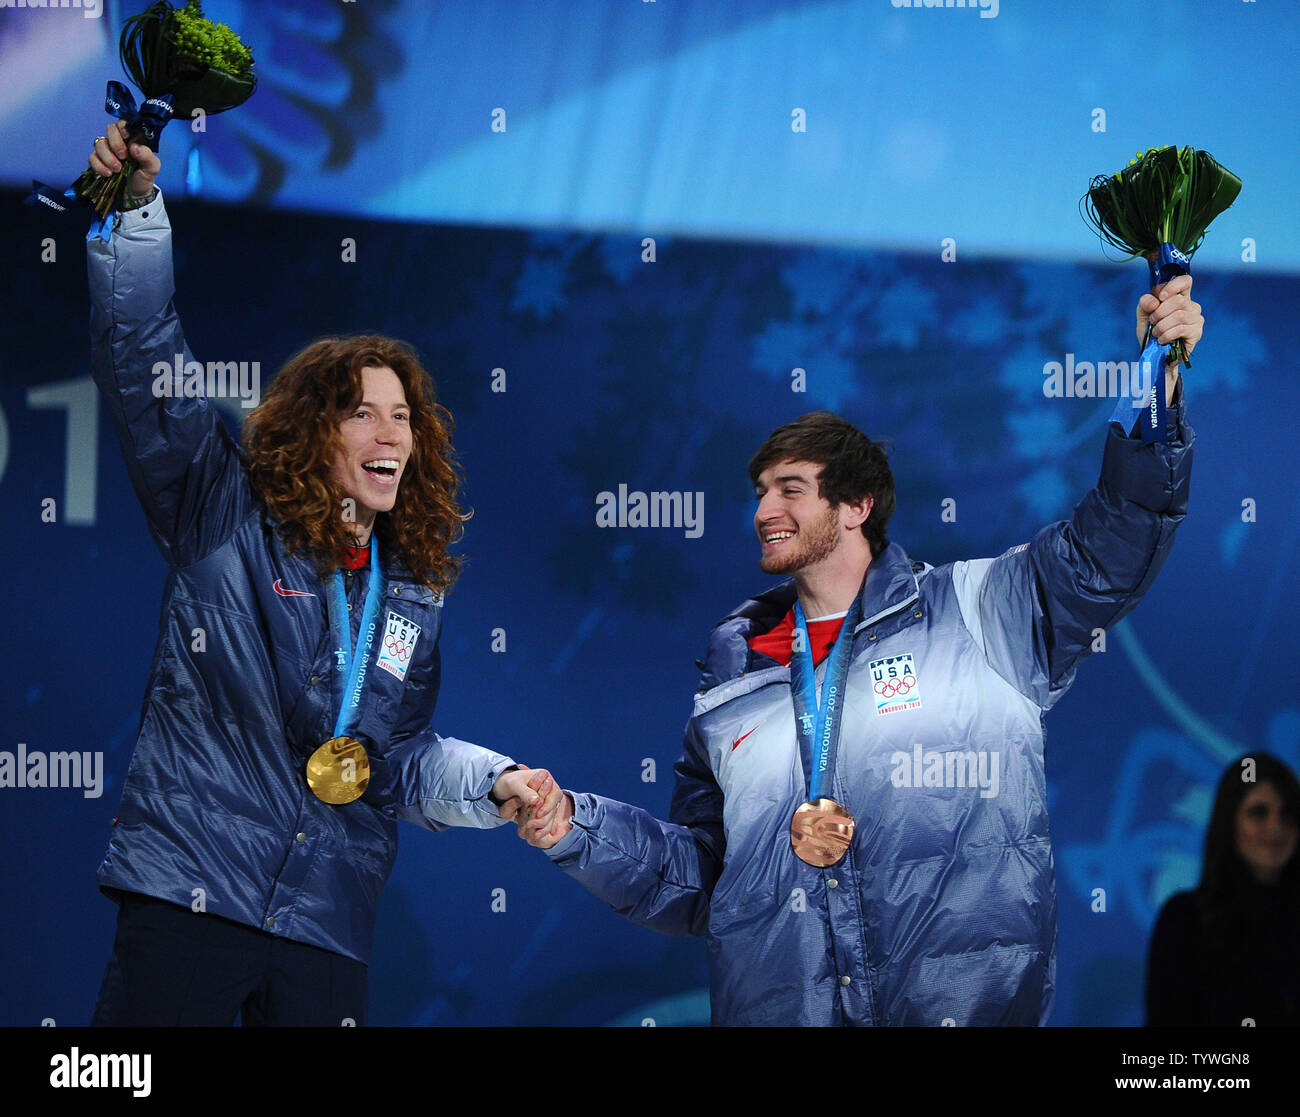 Shaun White (left, gold medal) and Scott Lago (bronze) of the United States celebrate their medals in men's snow boarding half pipe during a Medal Ceremony at BC Place in Vancouver, Canada, during the 2010 Winter Olympics on February 18, 2010.     UPI/Roger L. Wollenberg Stock Photo